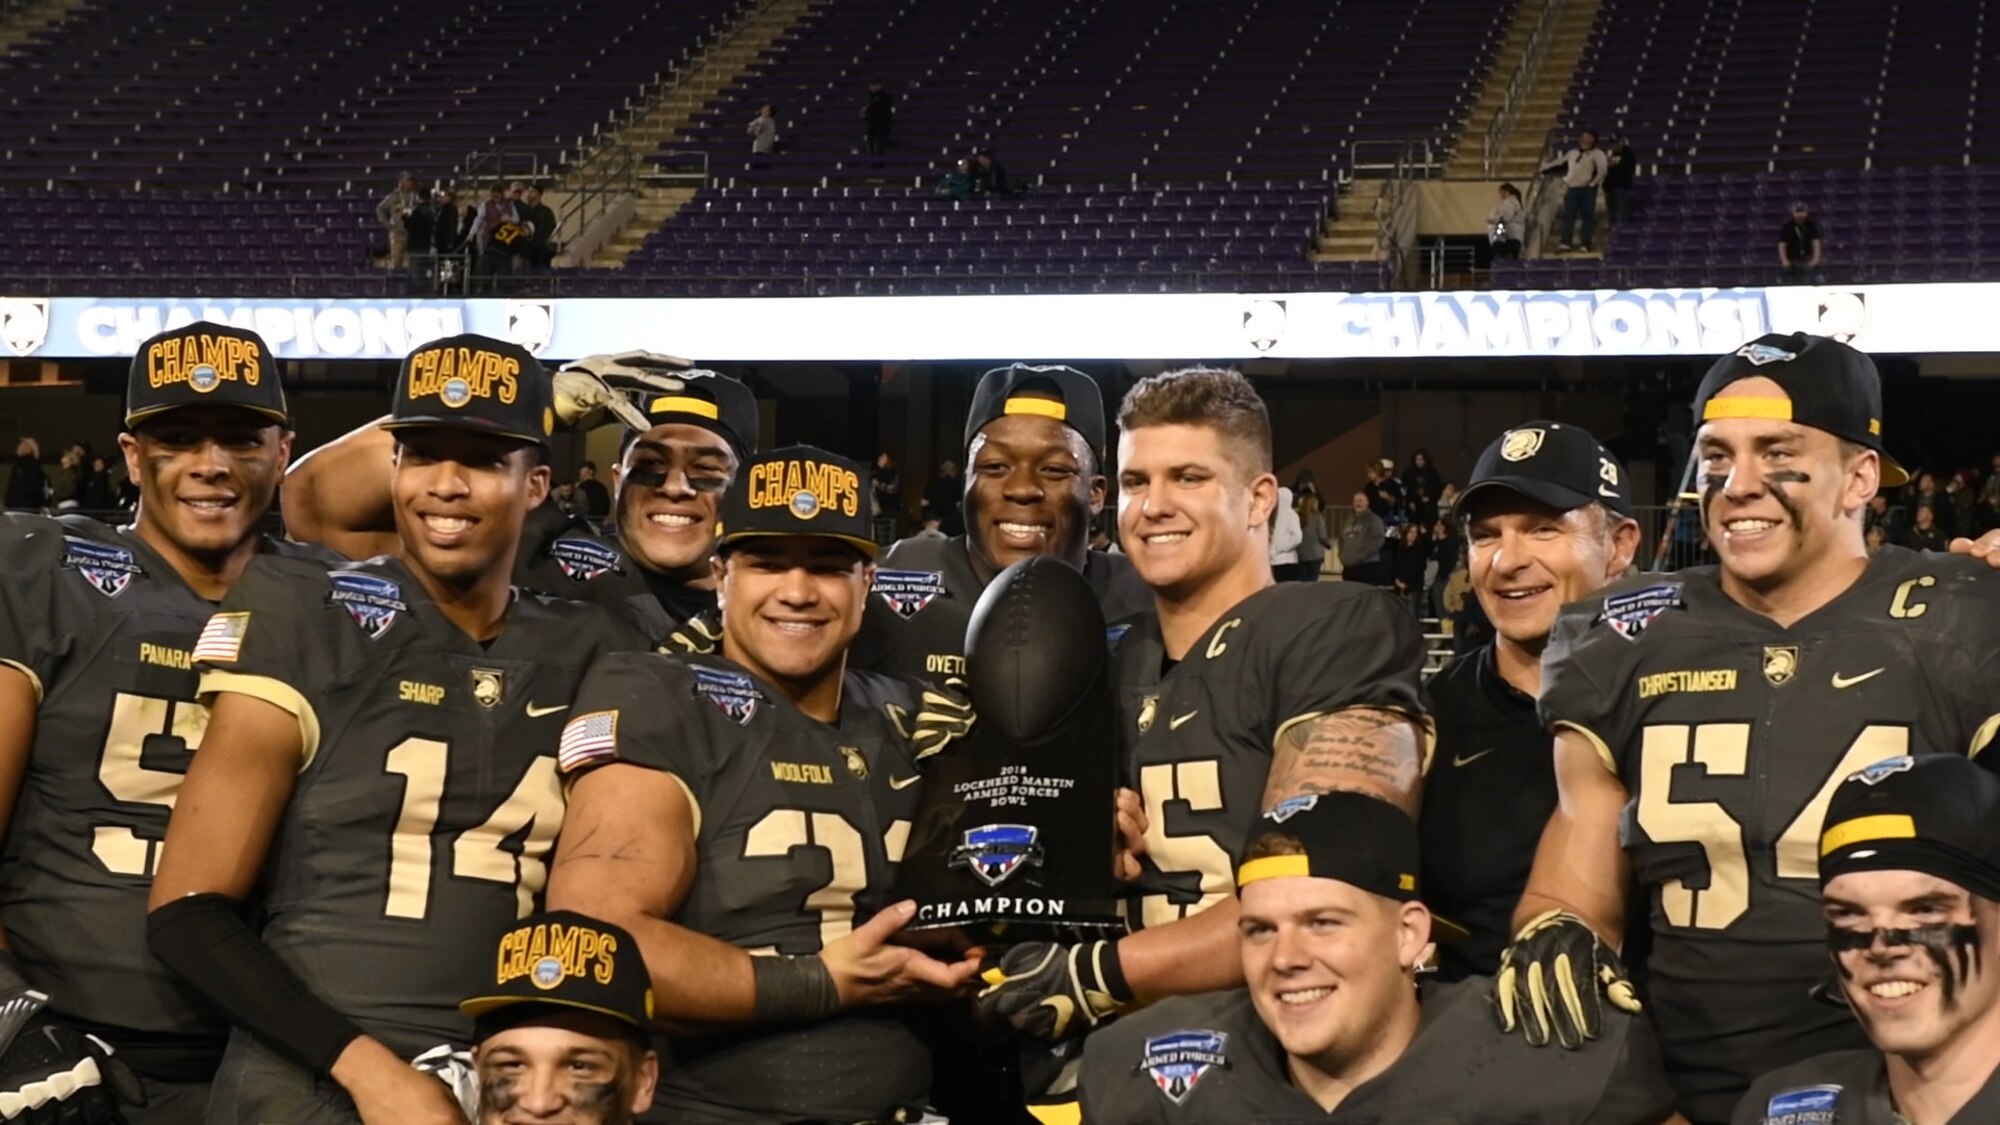 The U.S. Army team poses with the 2018 Armed Forces Bowl championship trophy, Dec. 22, 2018, at Fort Worth, Texas. This game tied for the highest scoring bowl game of all time. (U.S. Air Force photo by Amn Dallin Wrye)